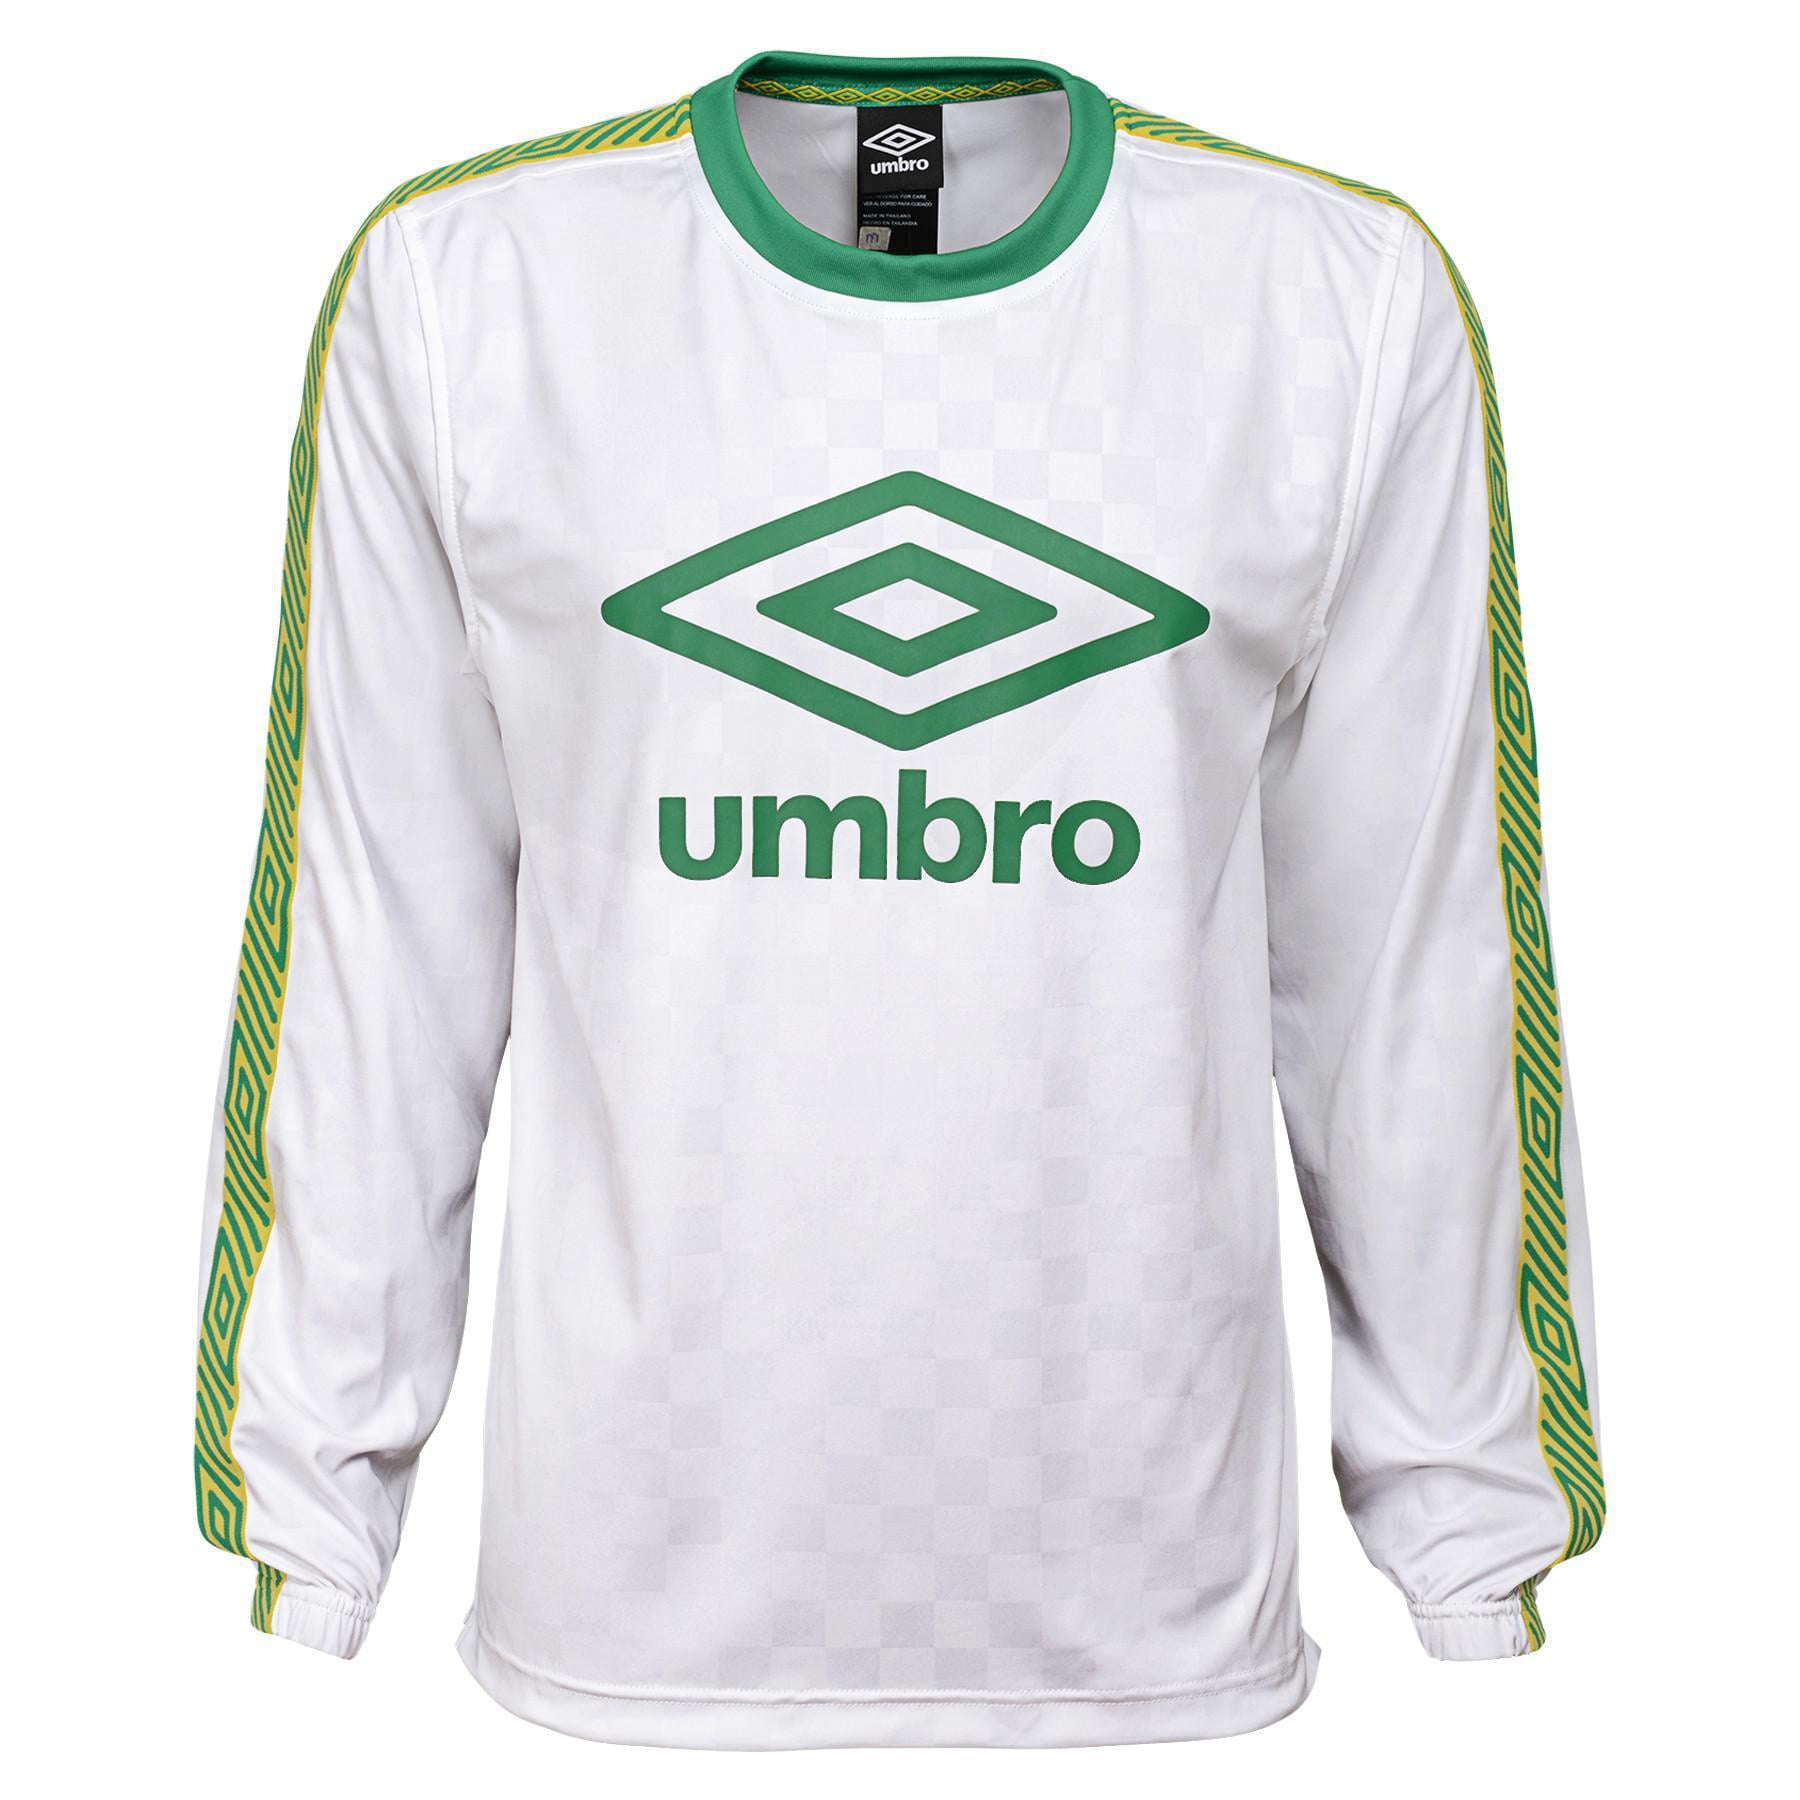 Umbro Polyester T Shirts Sale Online, SAVE 54%.